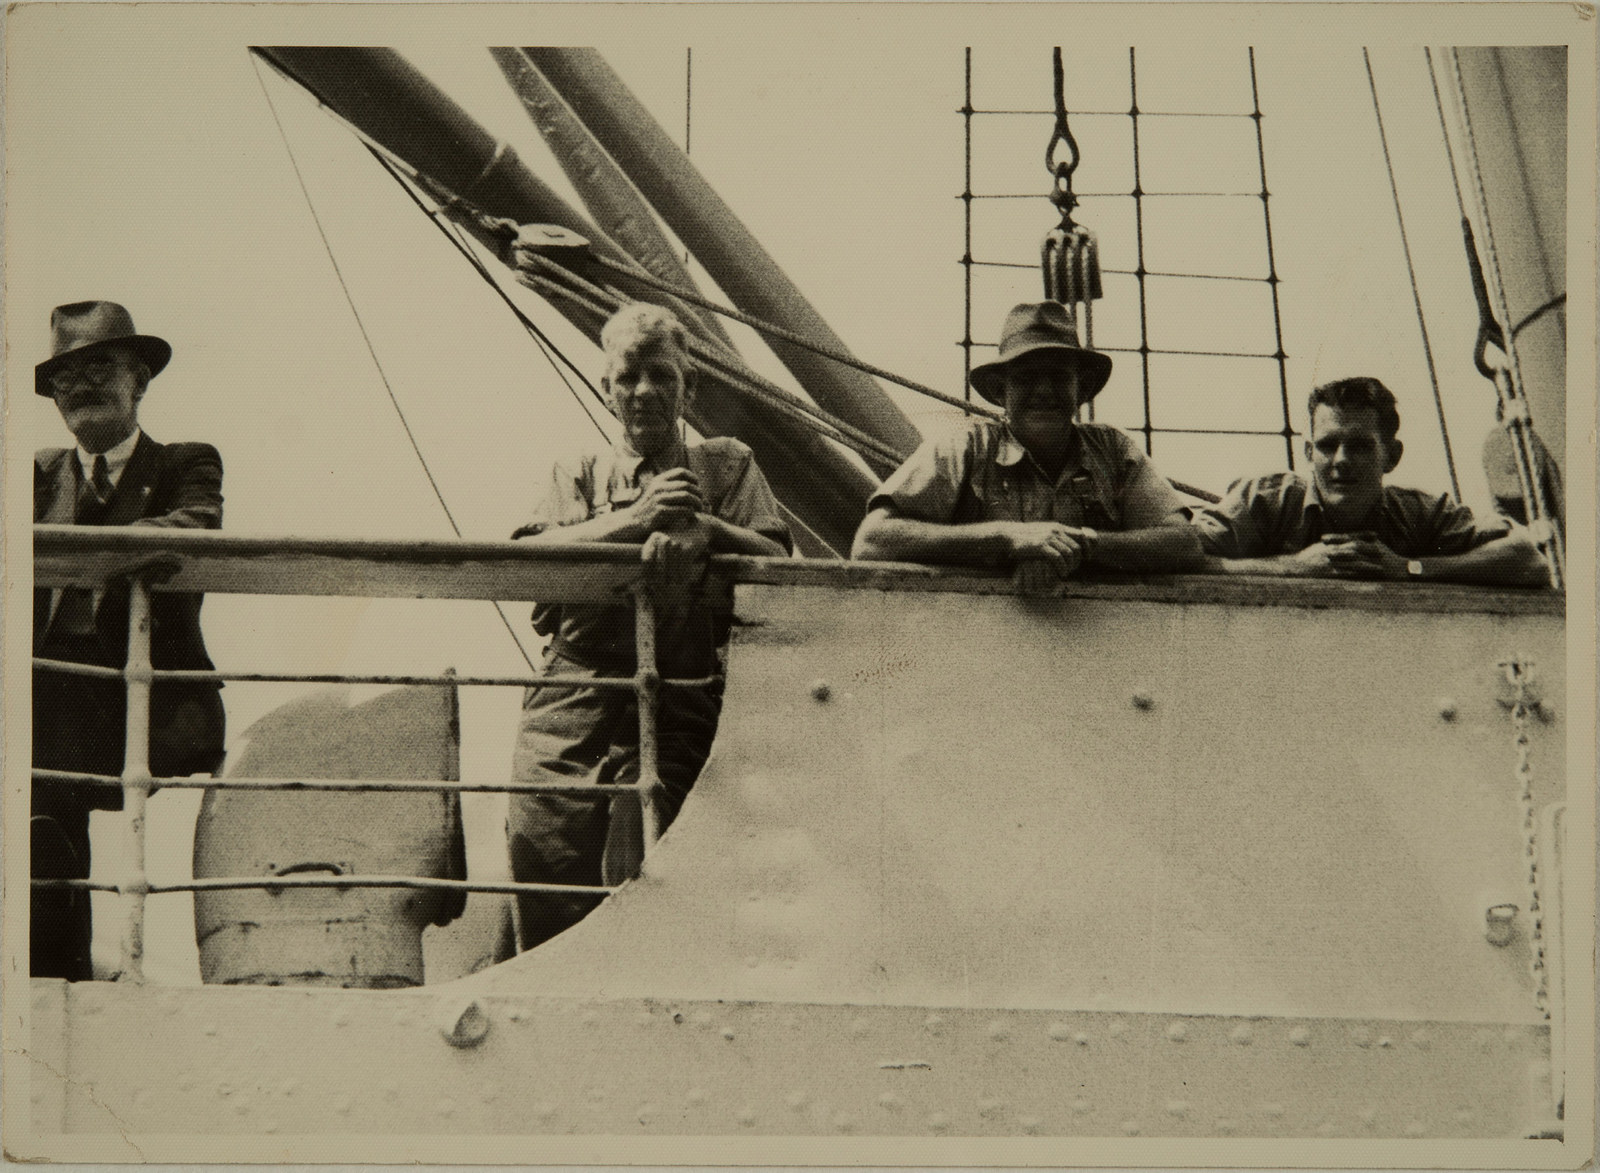 Martin Andersen (second from left) and unknown men standing  on the deck of a boat